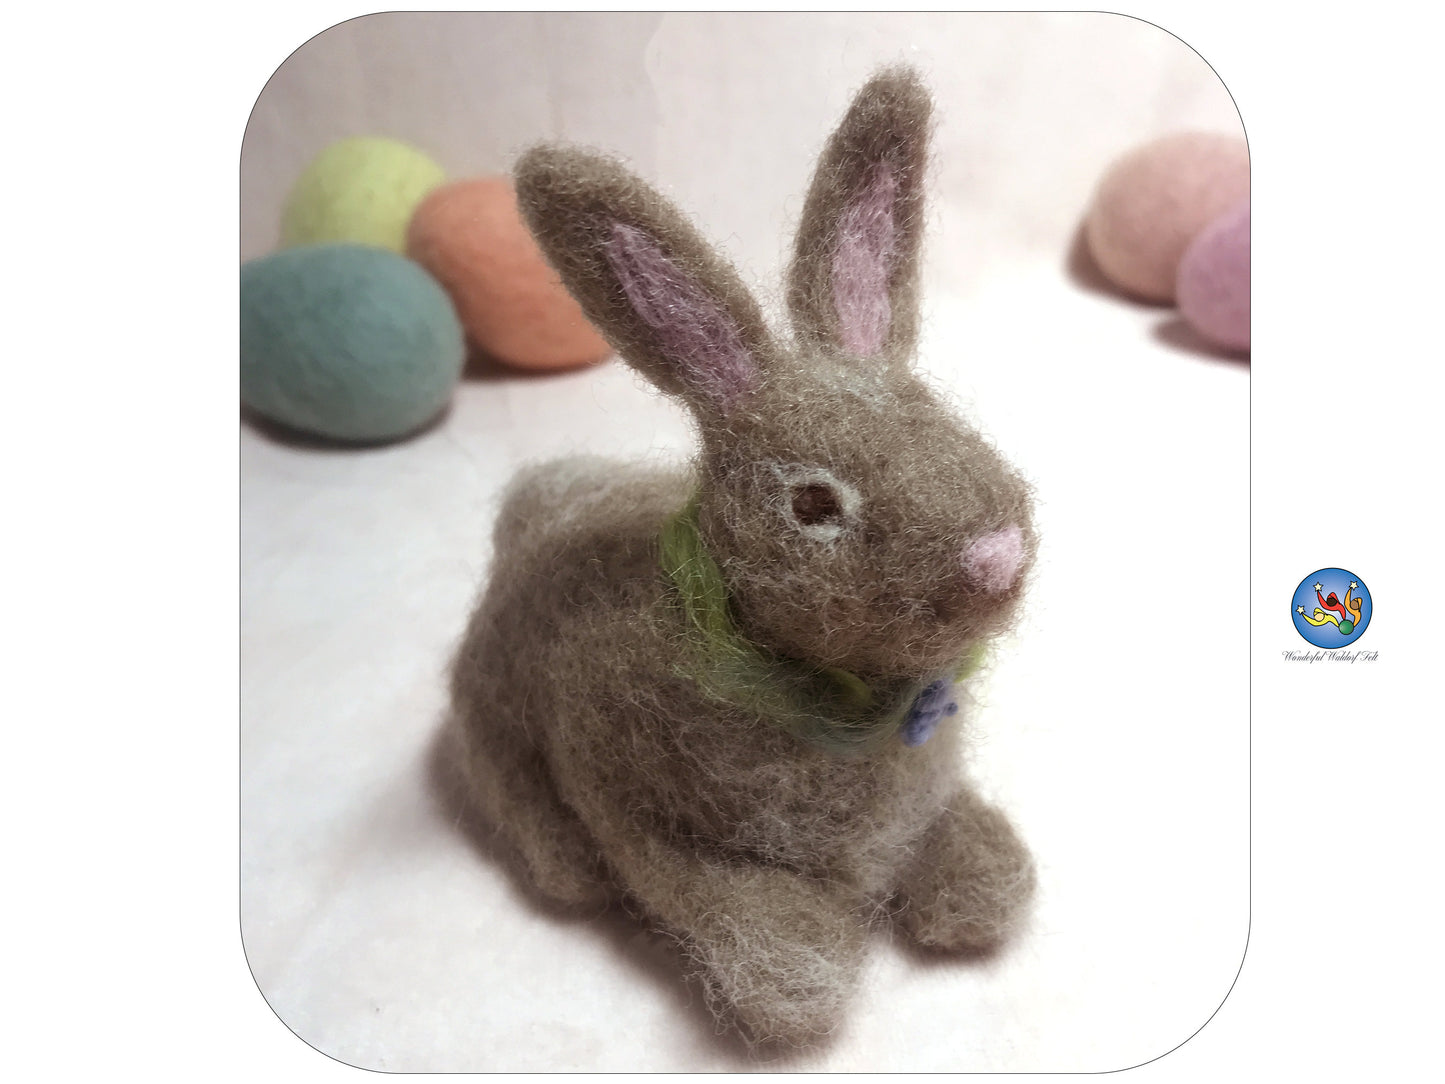 Needle felted Easter Bunny figurine in light brown wool. Ostara decoration. Waldorf inspired felted animal.